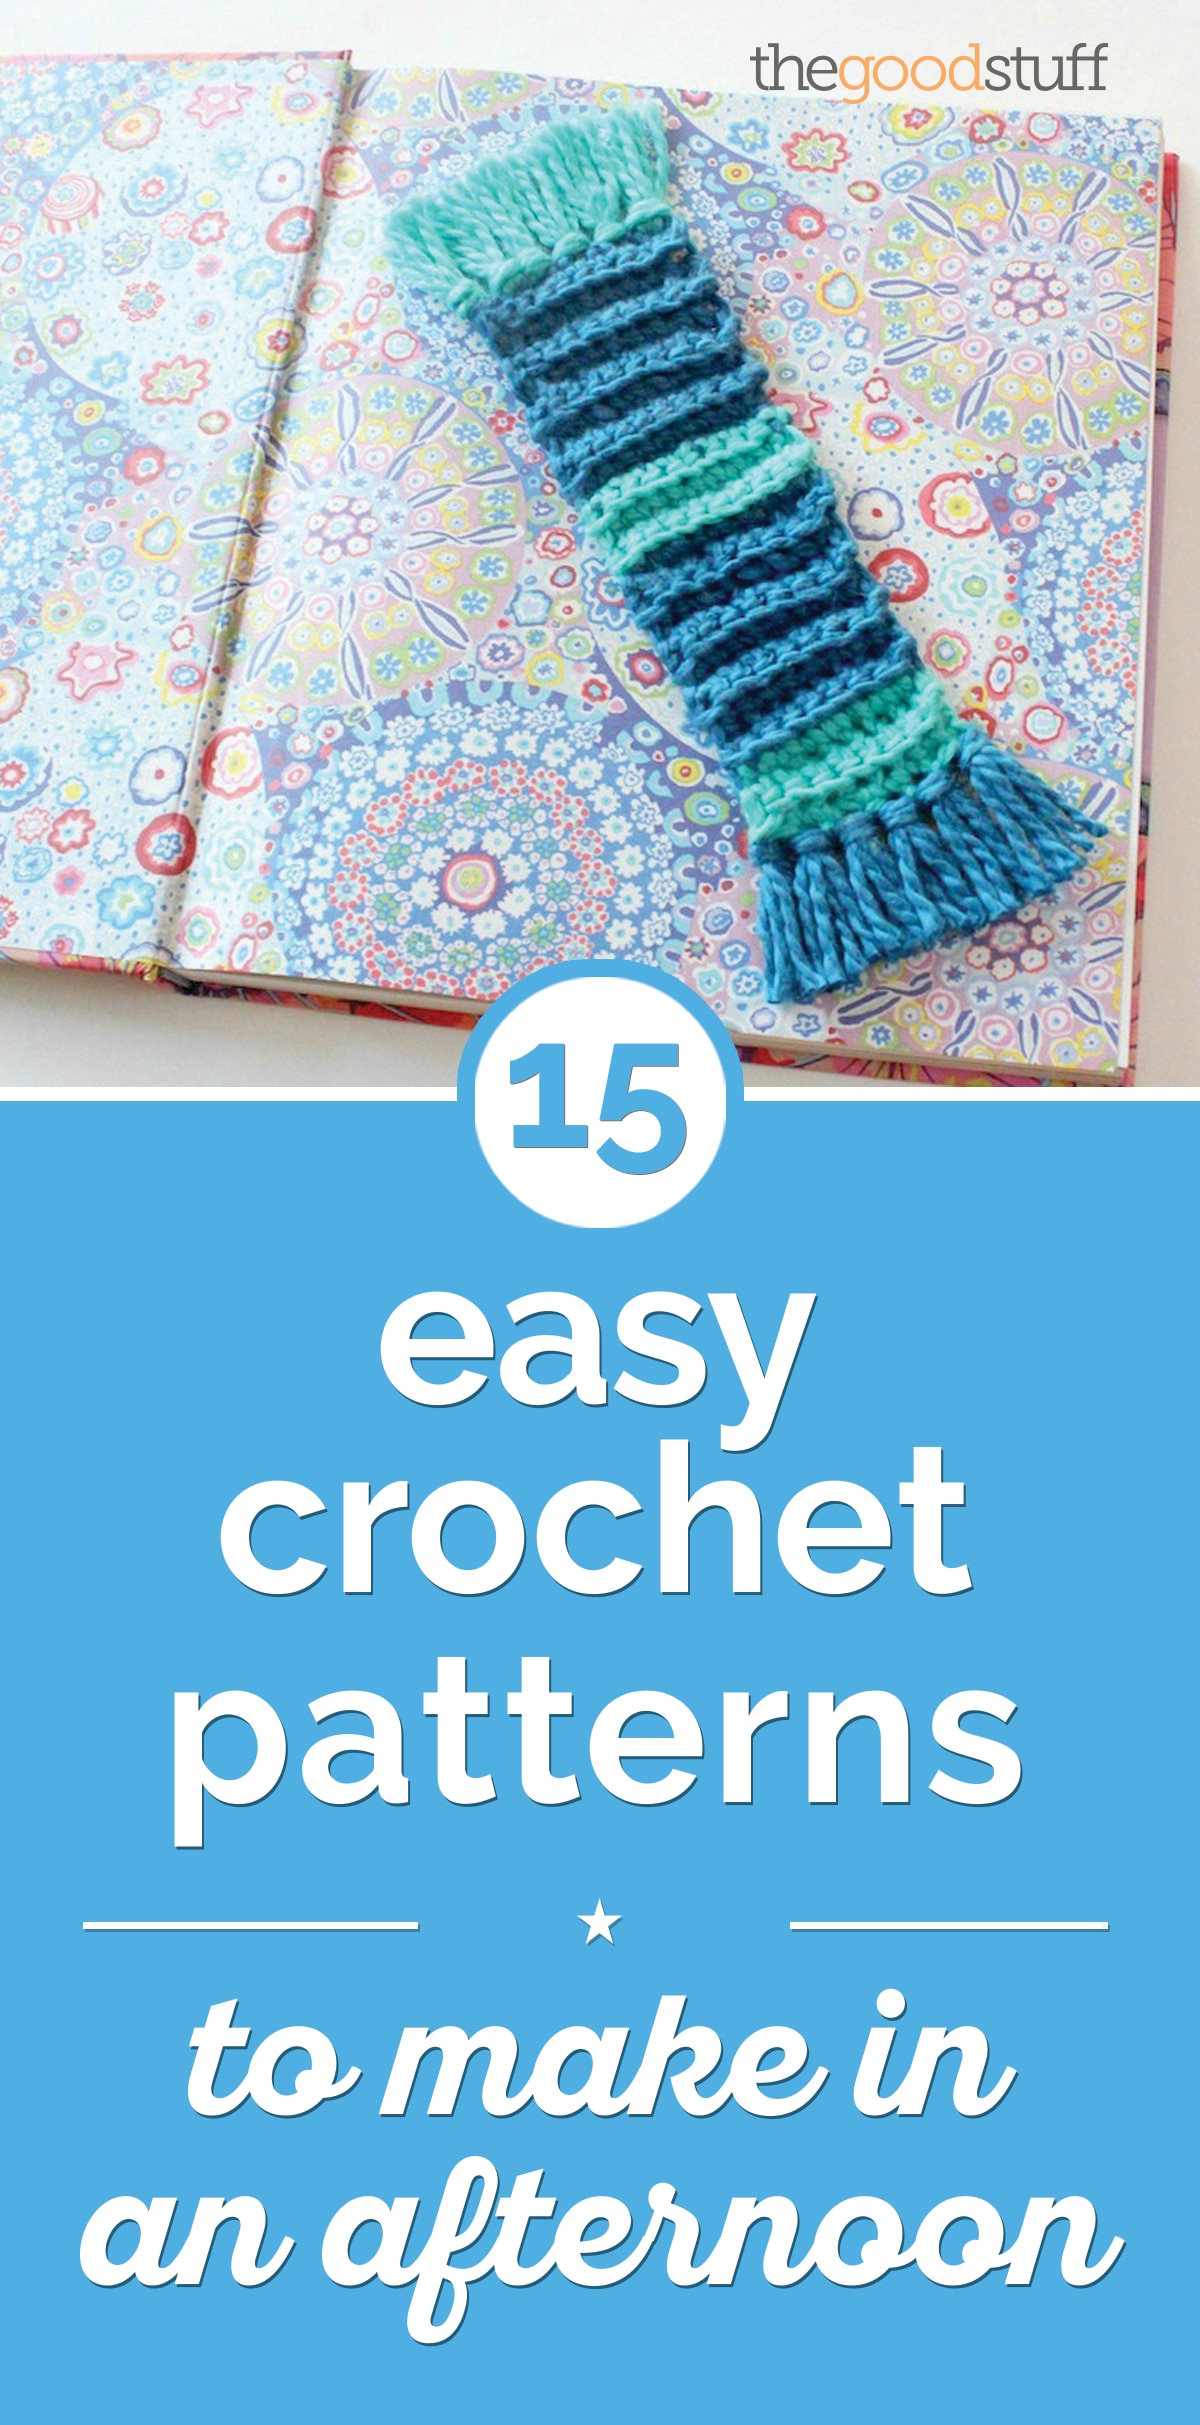 Crochet Bookworm Bookmark Pattern 15 Easy Crochet Patterns To Make In An Afternoon Thegoodstuff